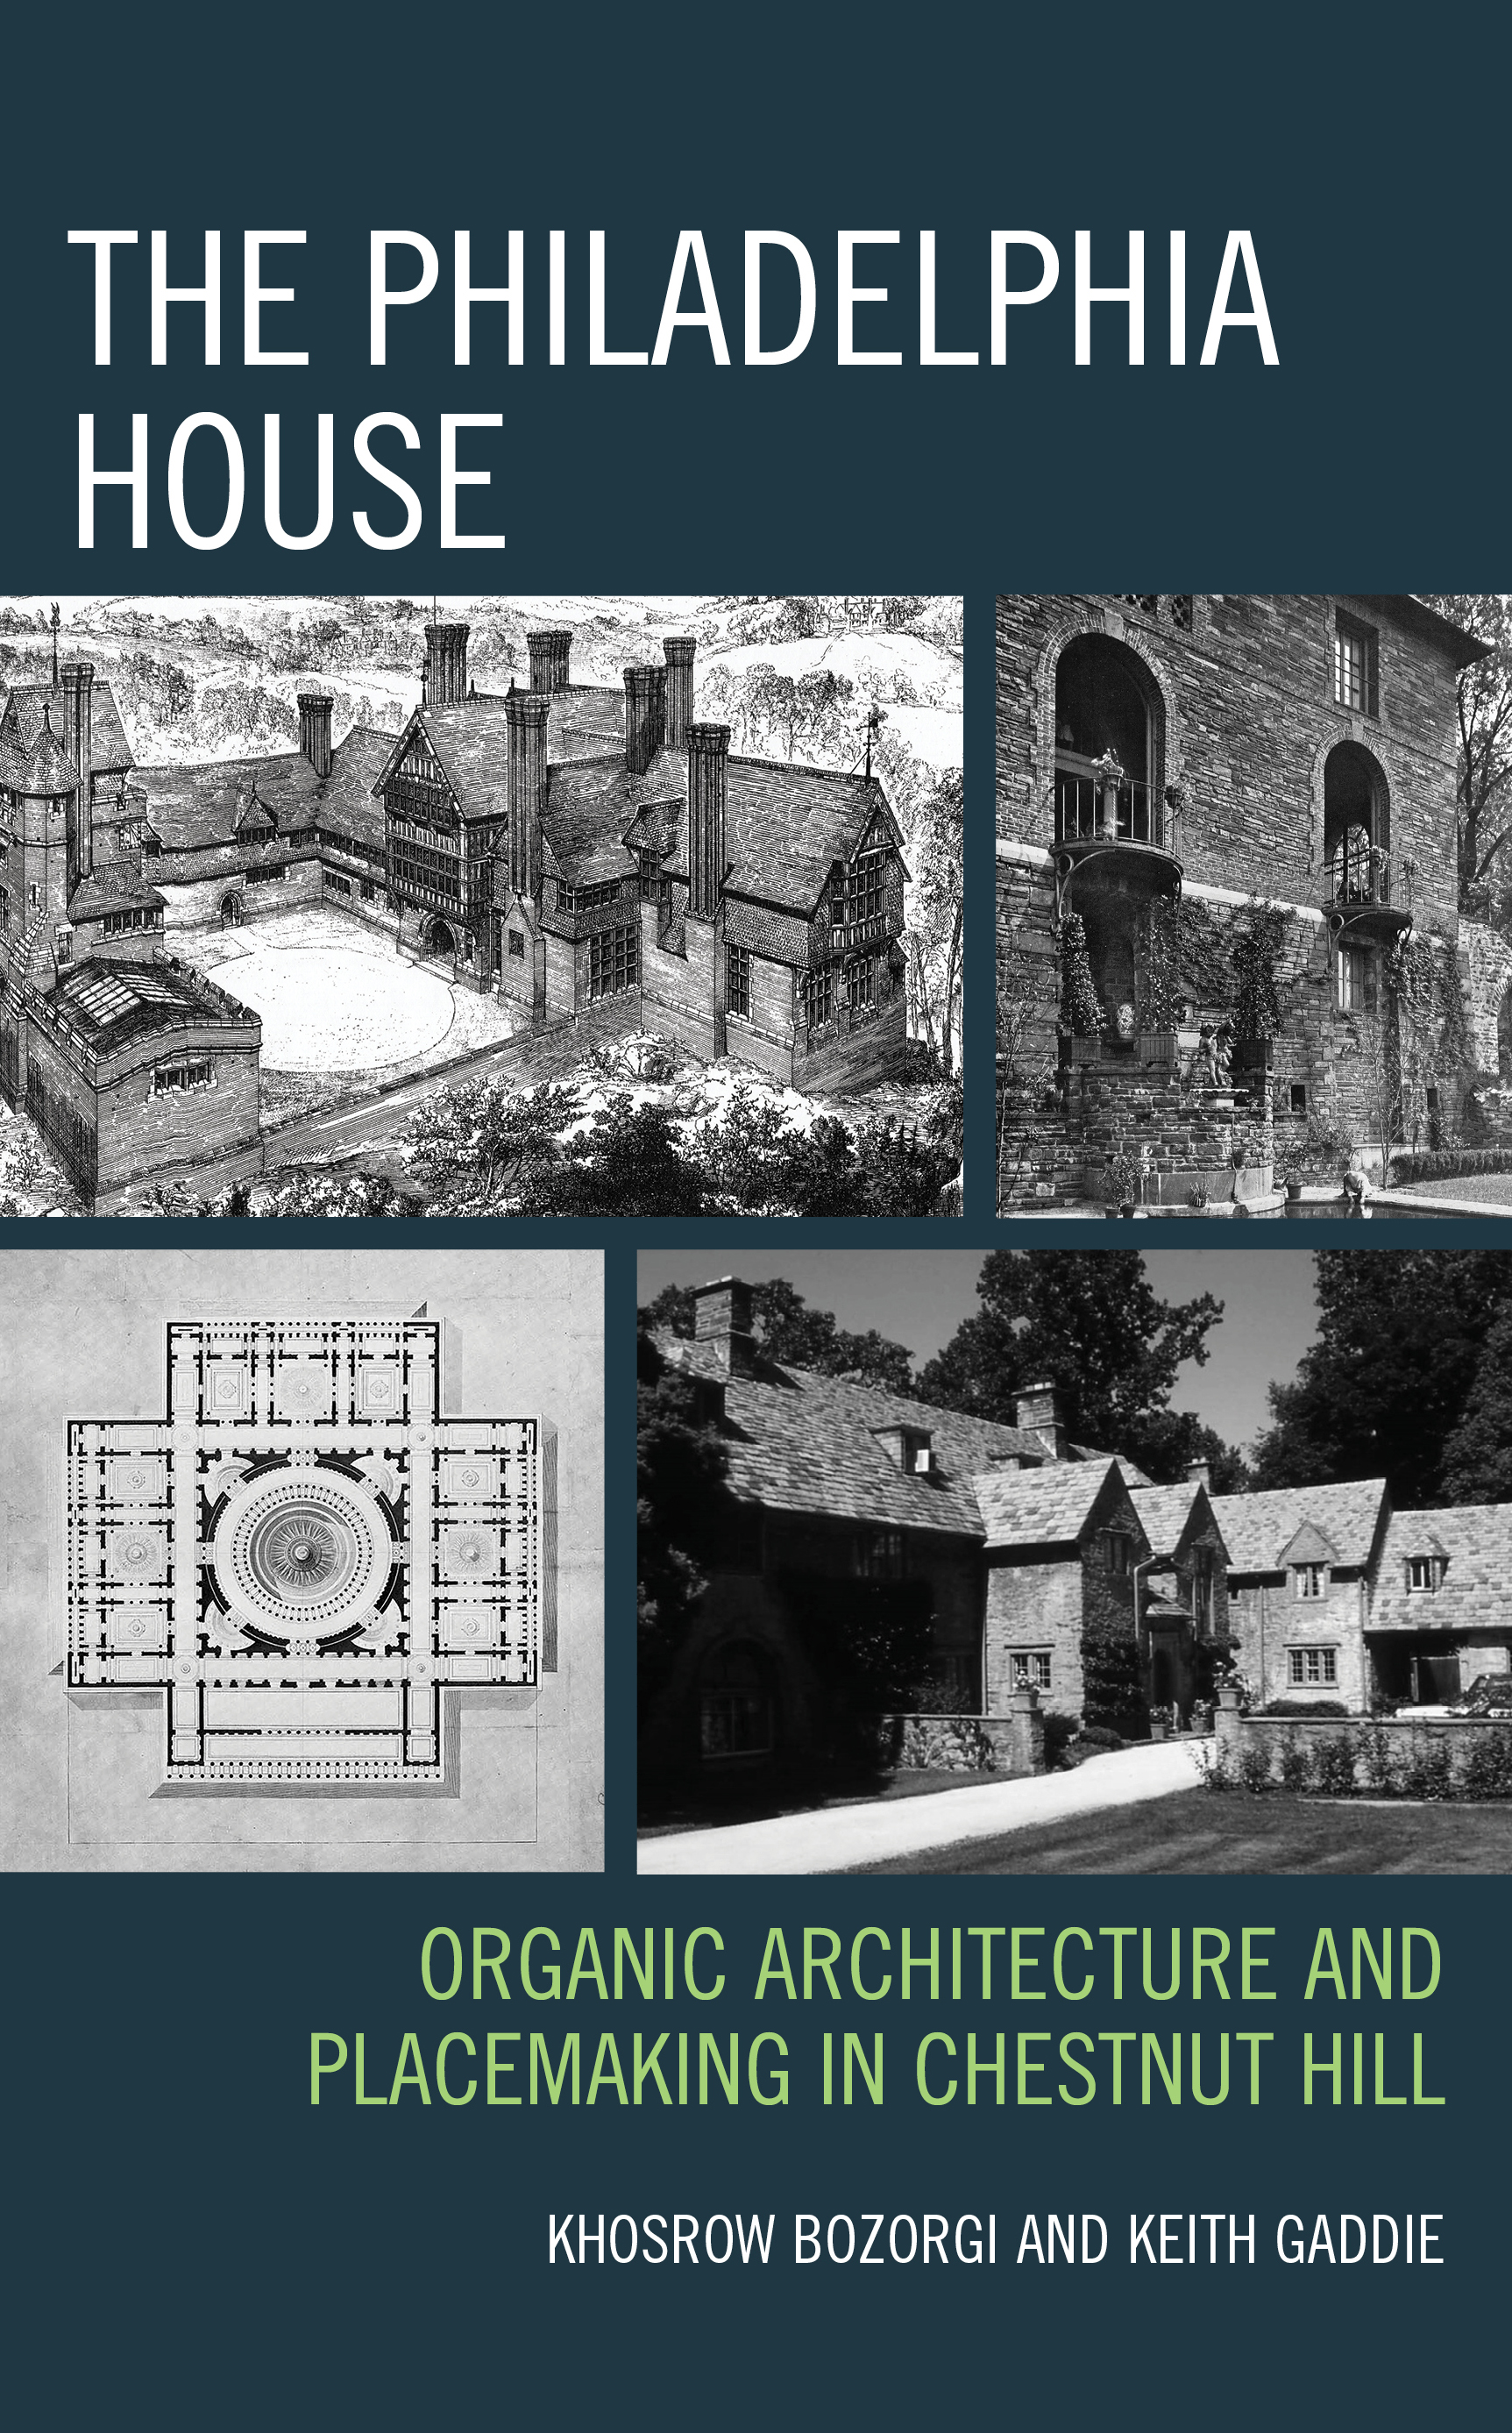 The Philadelphia House: Organic Architecture and Placemaking in Chestnut Hill